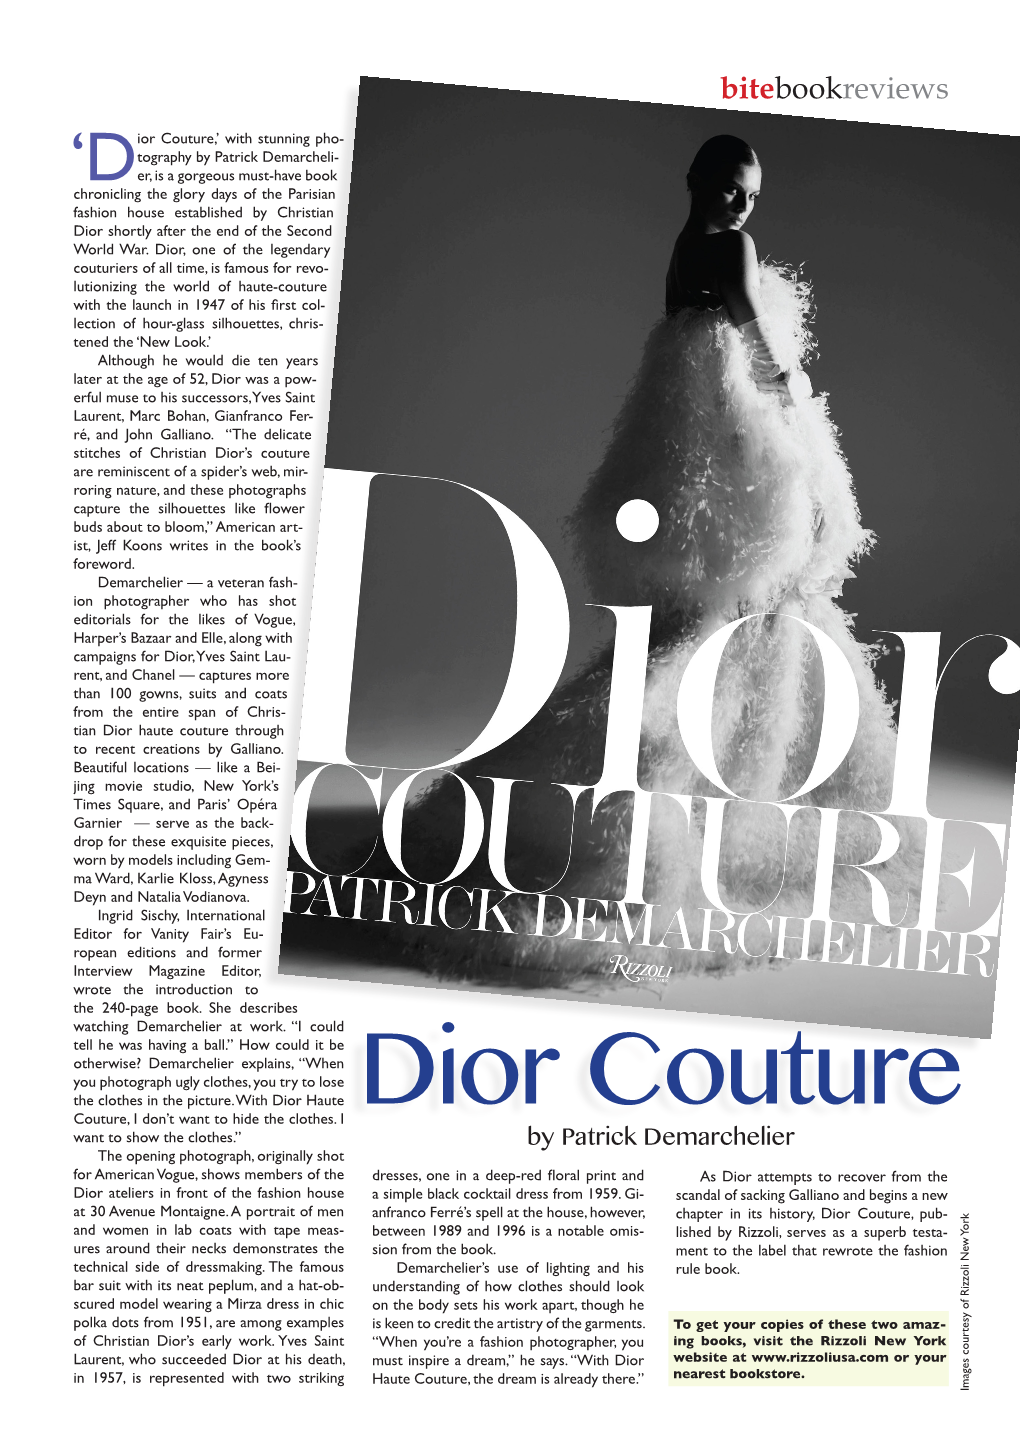 'Dior Couture,' with Stunning